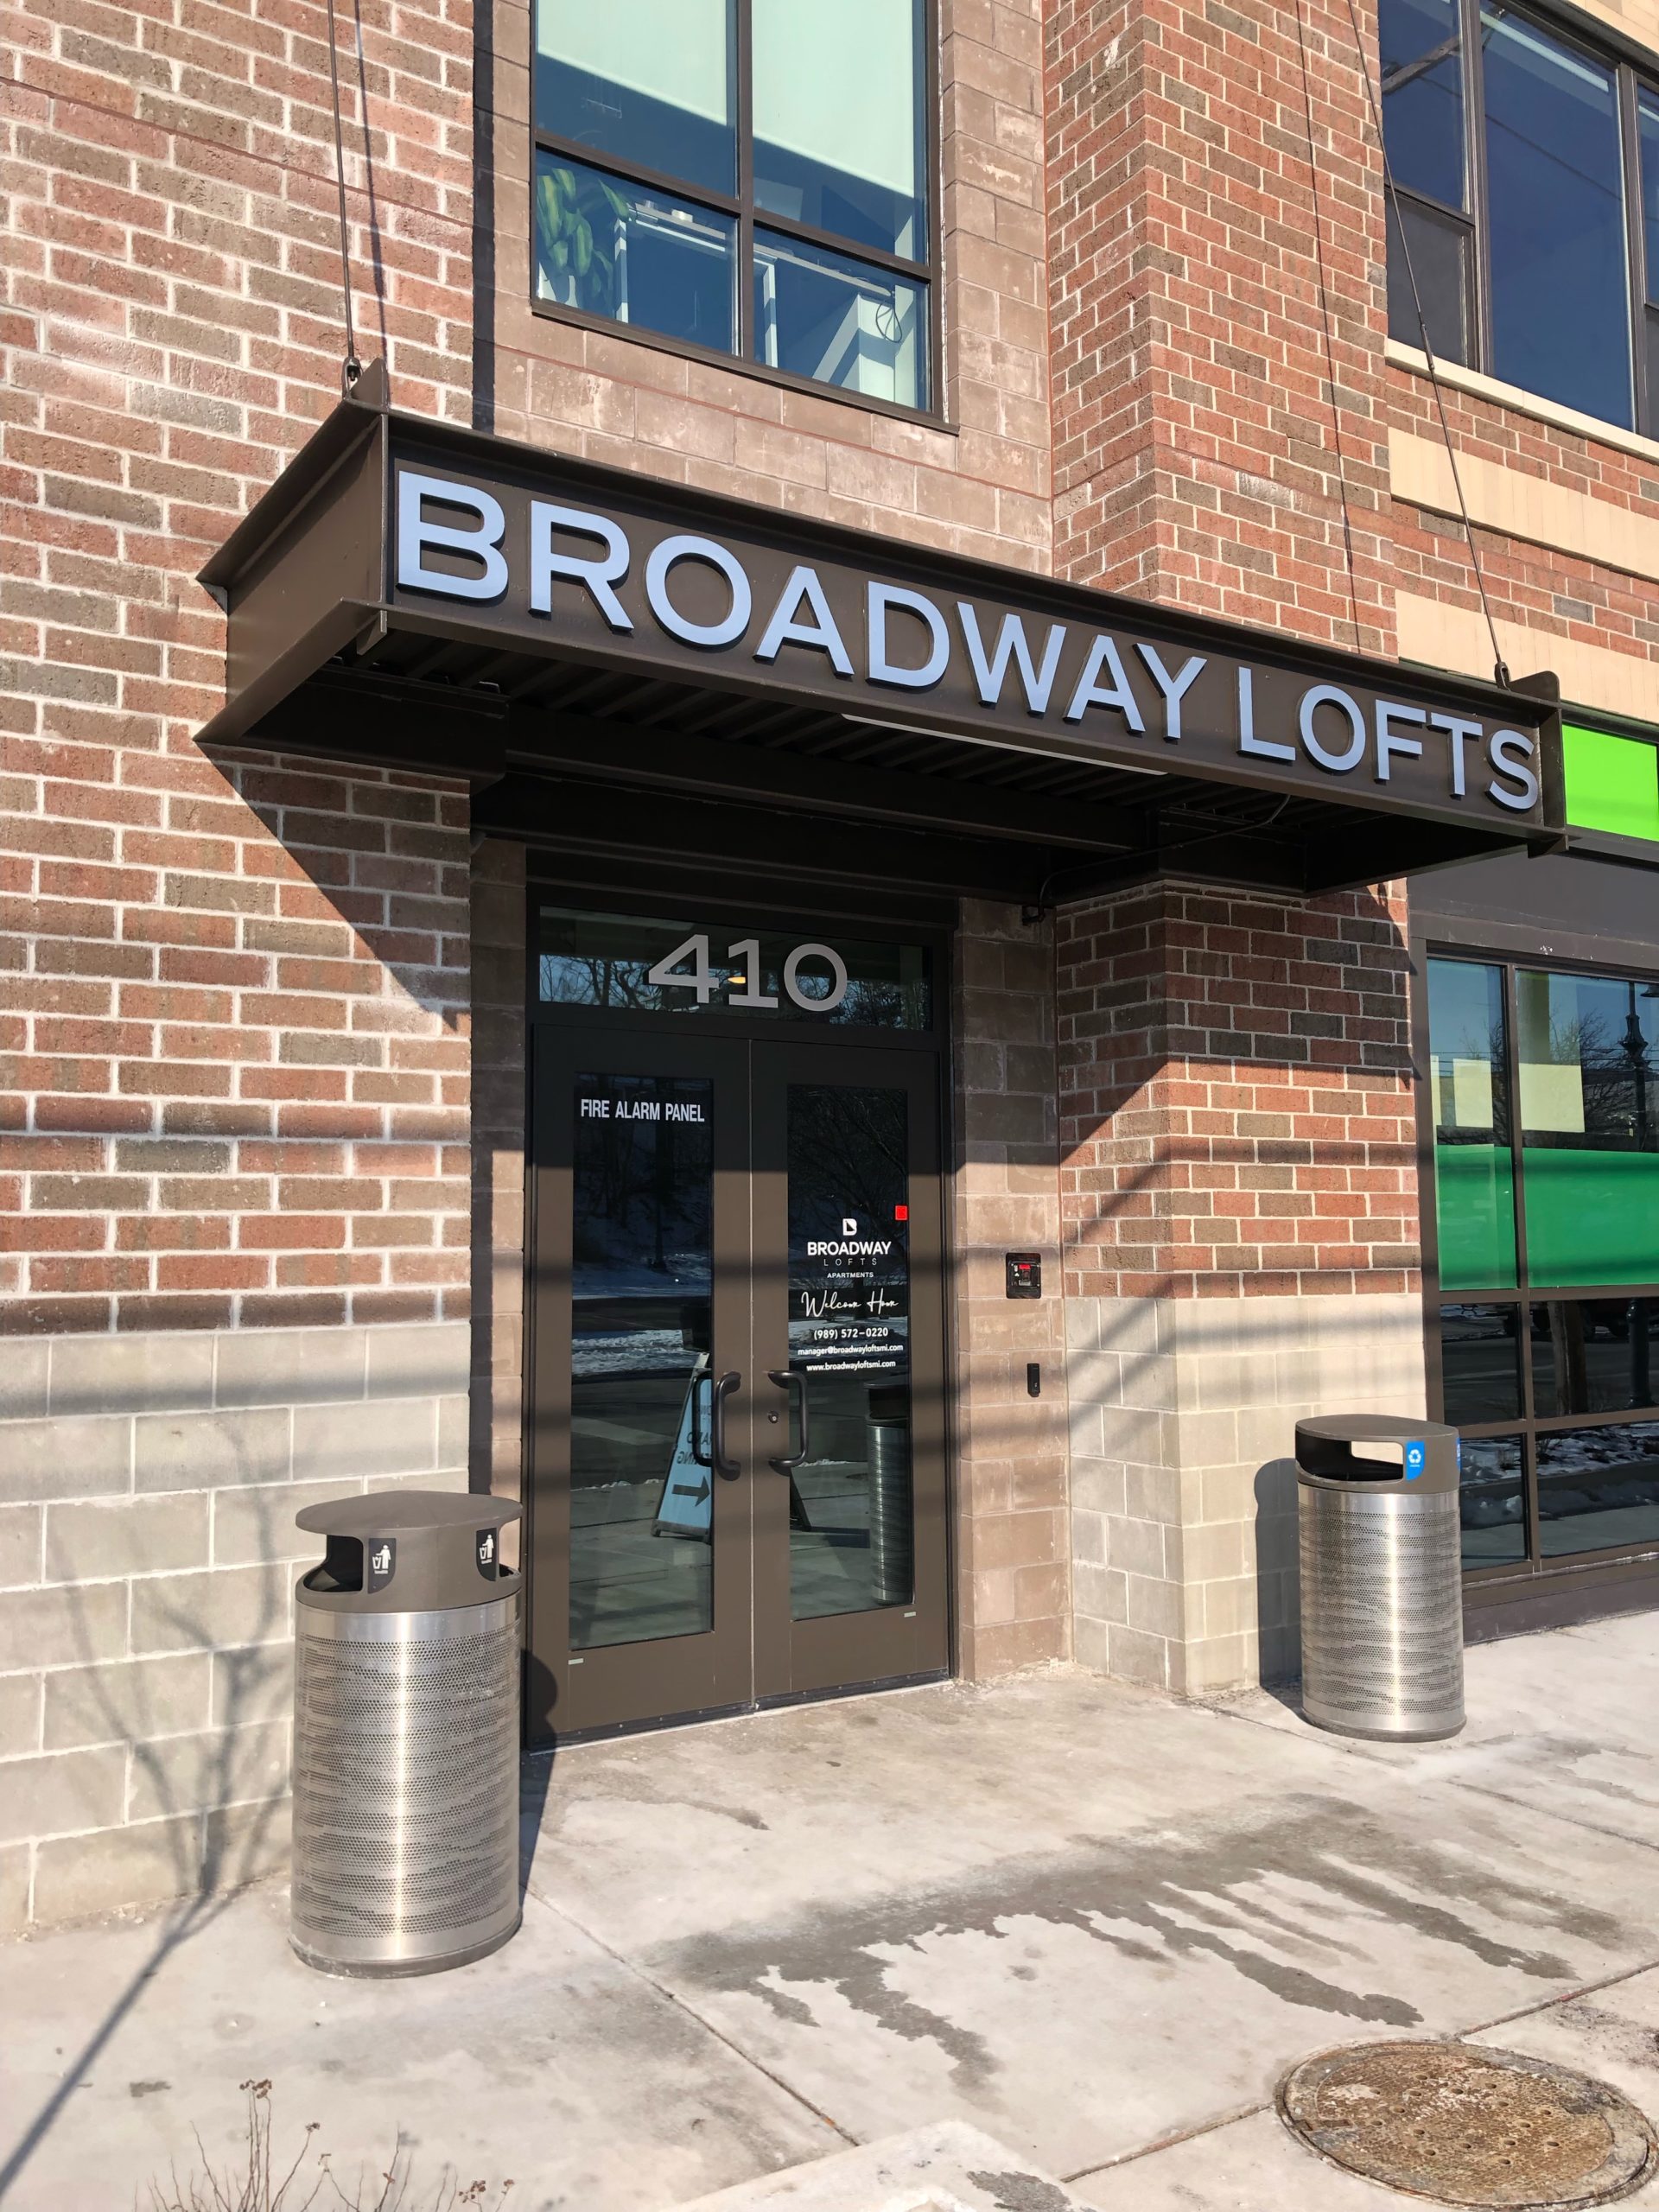 Cinnaire Joins Partners to Celebrate Grand Opening for Broadway Lofts in Mt. Pleasant, MI